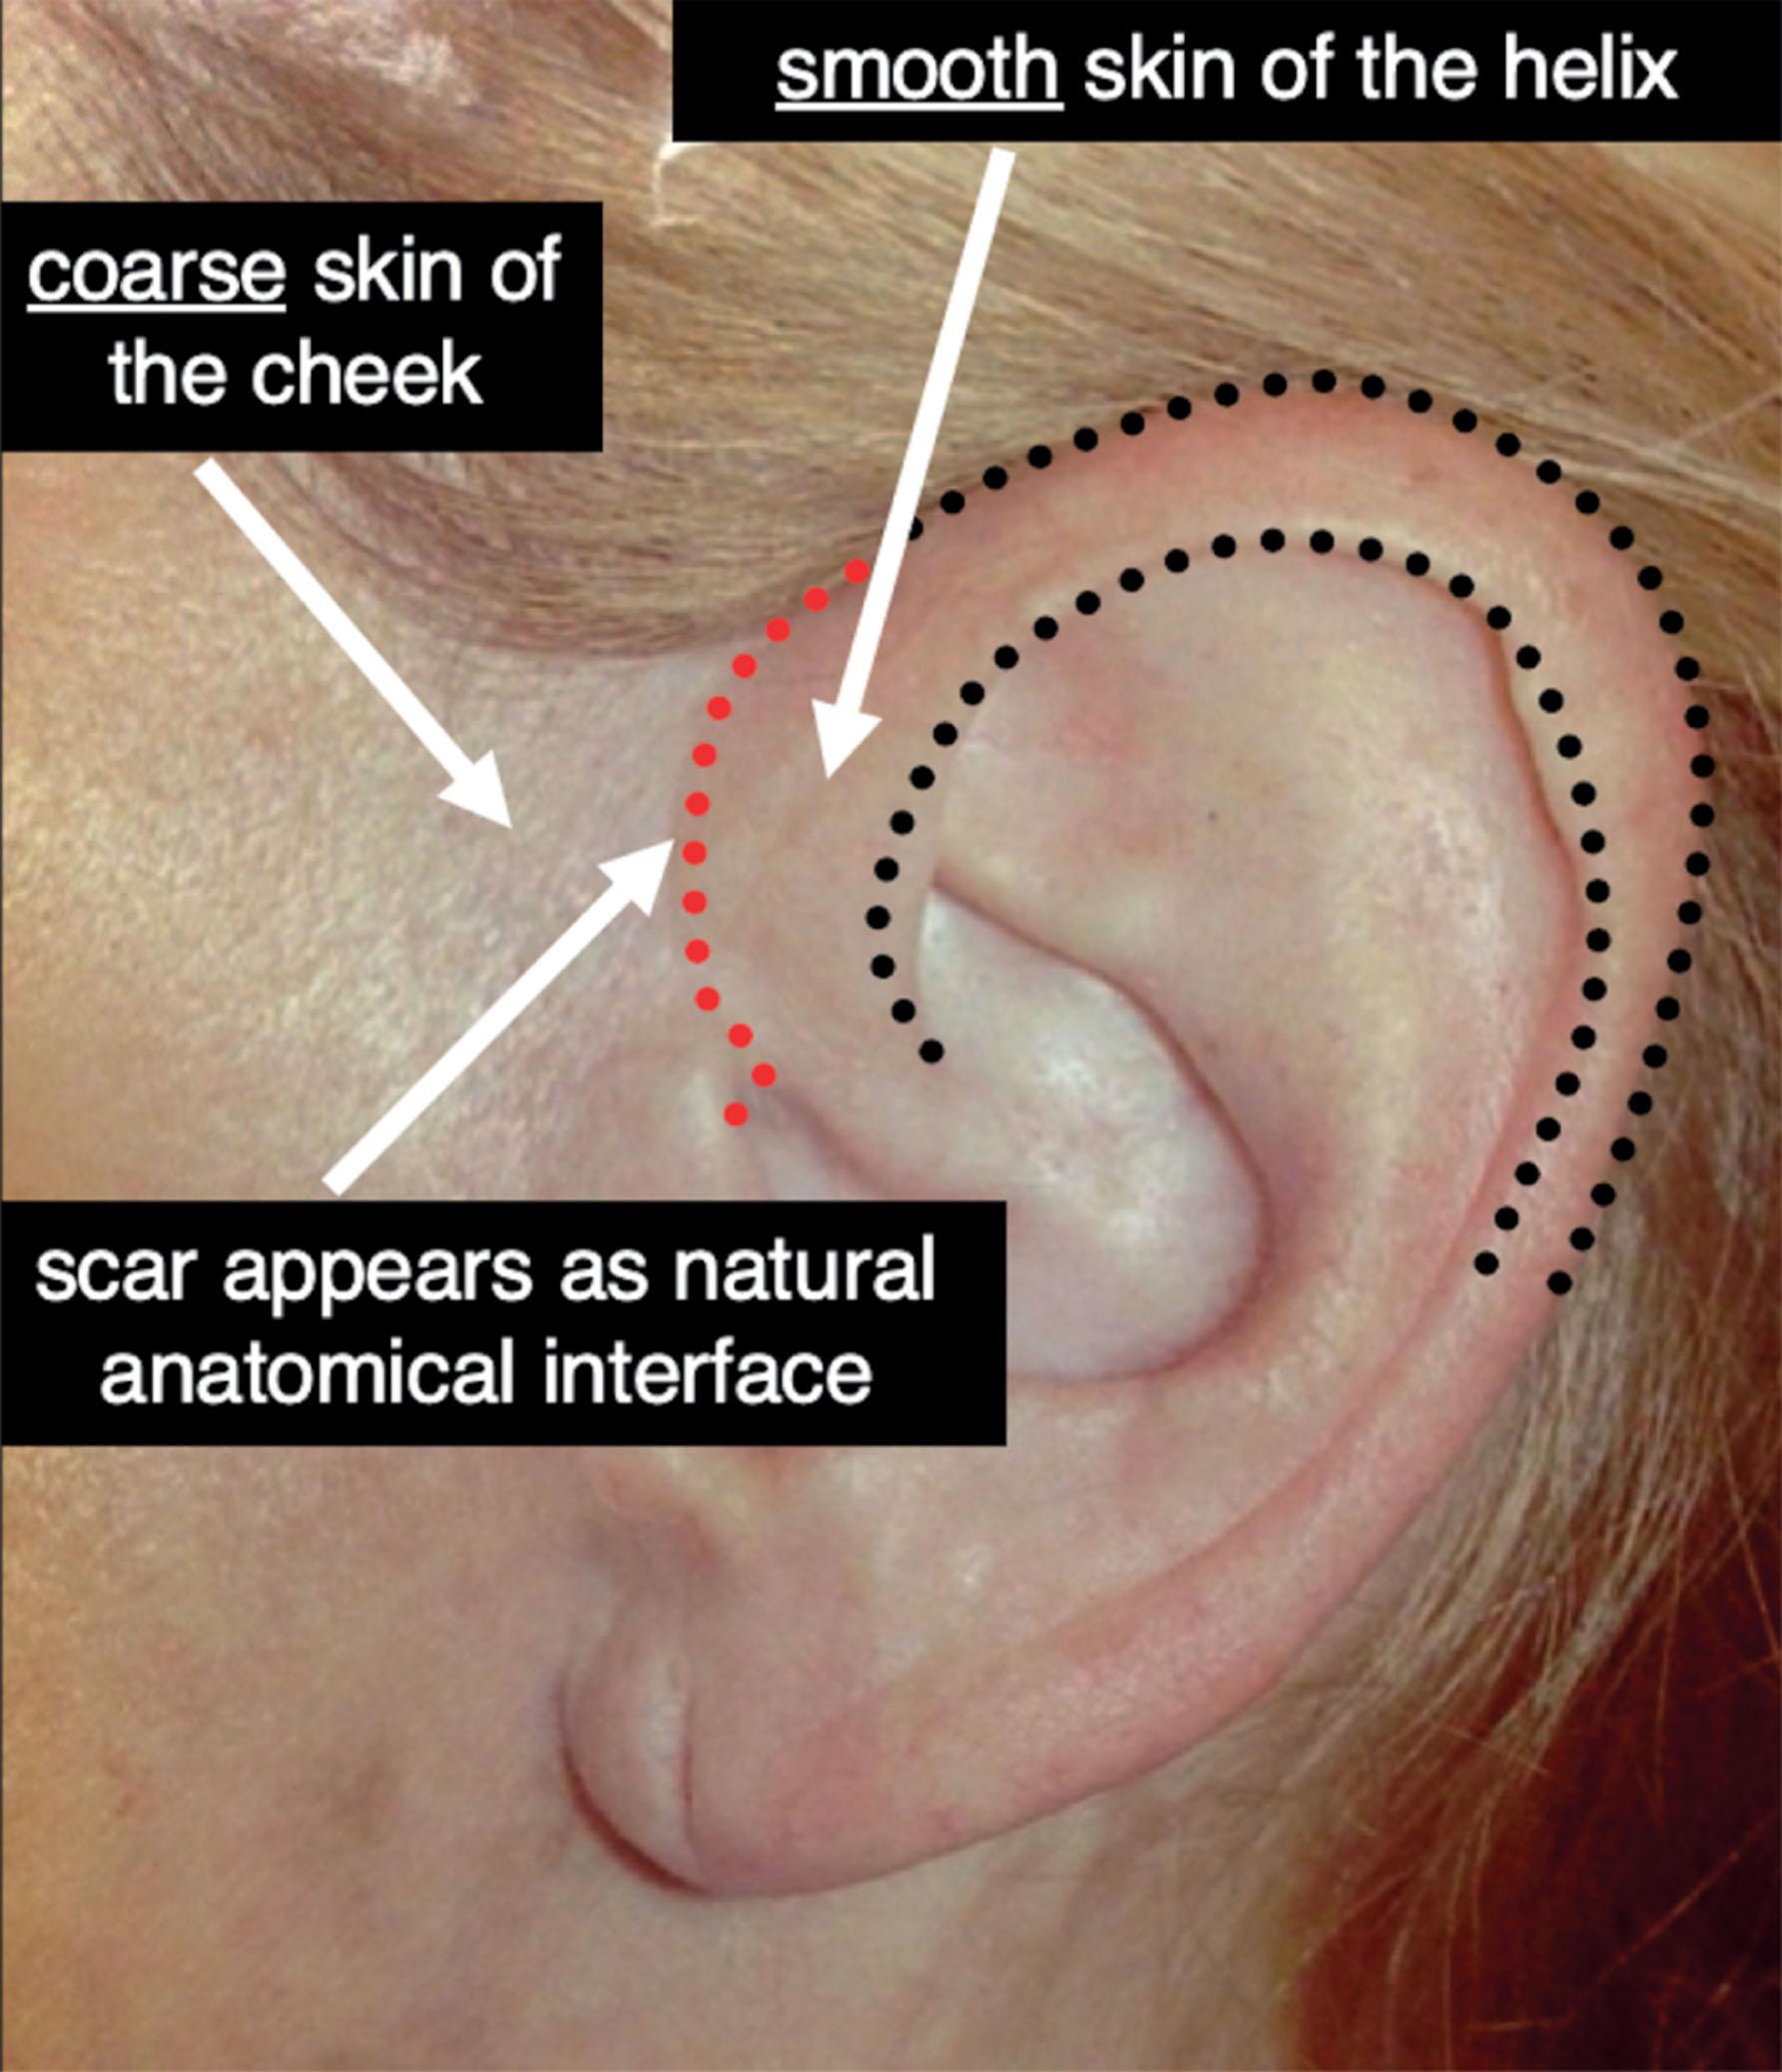 Figure 9.8.15, Optimal position of prehelical part of the pre-auricular incision. The prehelical portion of the pre-auricular incision (red dotted line) should be planned as a soft curve paralleling the curve of the anterior border of the helix. This will result in a natural-appearing “width” to the helix in keeping with the rest of the ear (black dotted lines) and the resultant scar, if visible, will appear to be a helical highlight and be disguised as the natural transition between the smooth pinker skin of the helix and the coarser paler skin of the cheek.